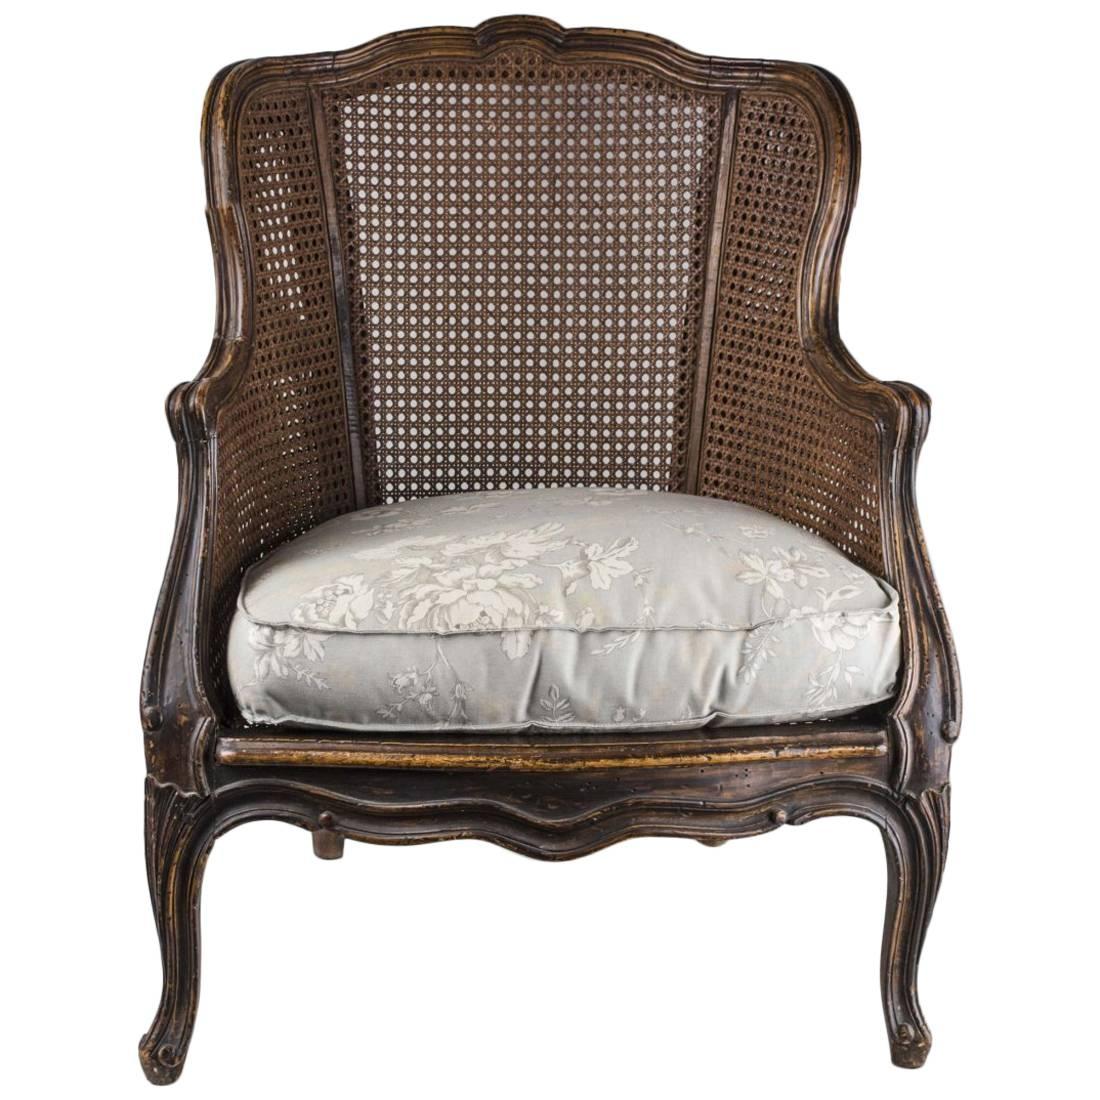 Caned Bergere in the Louis XV Taste